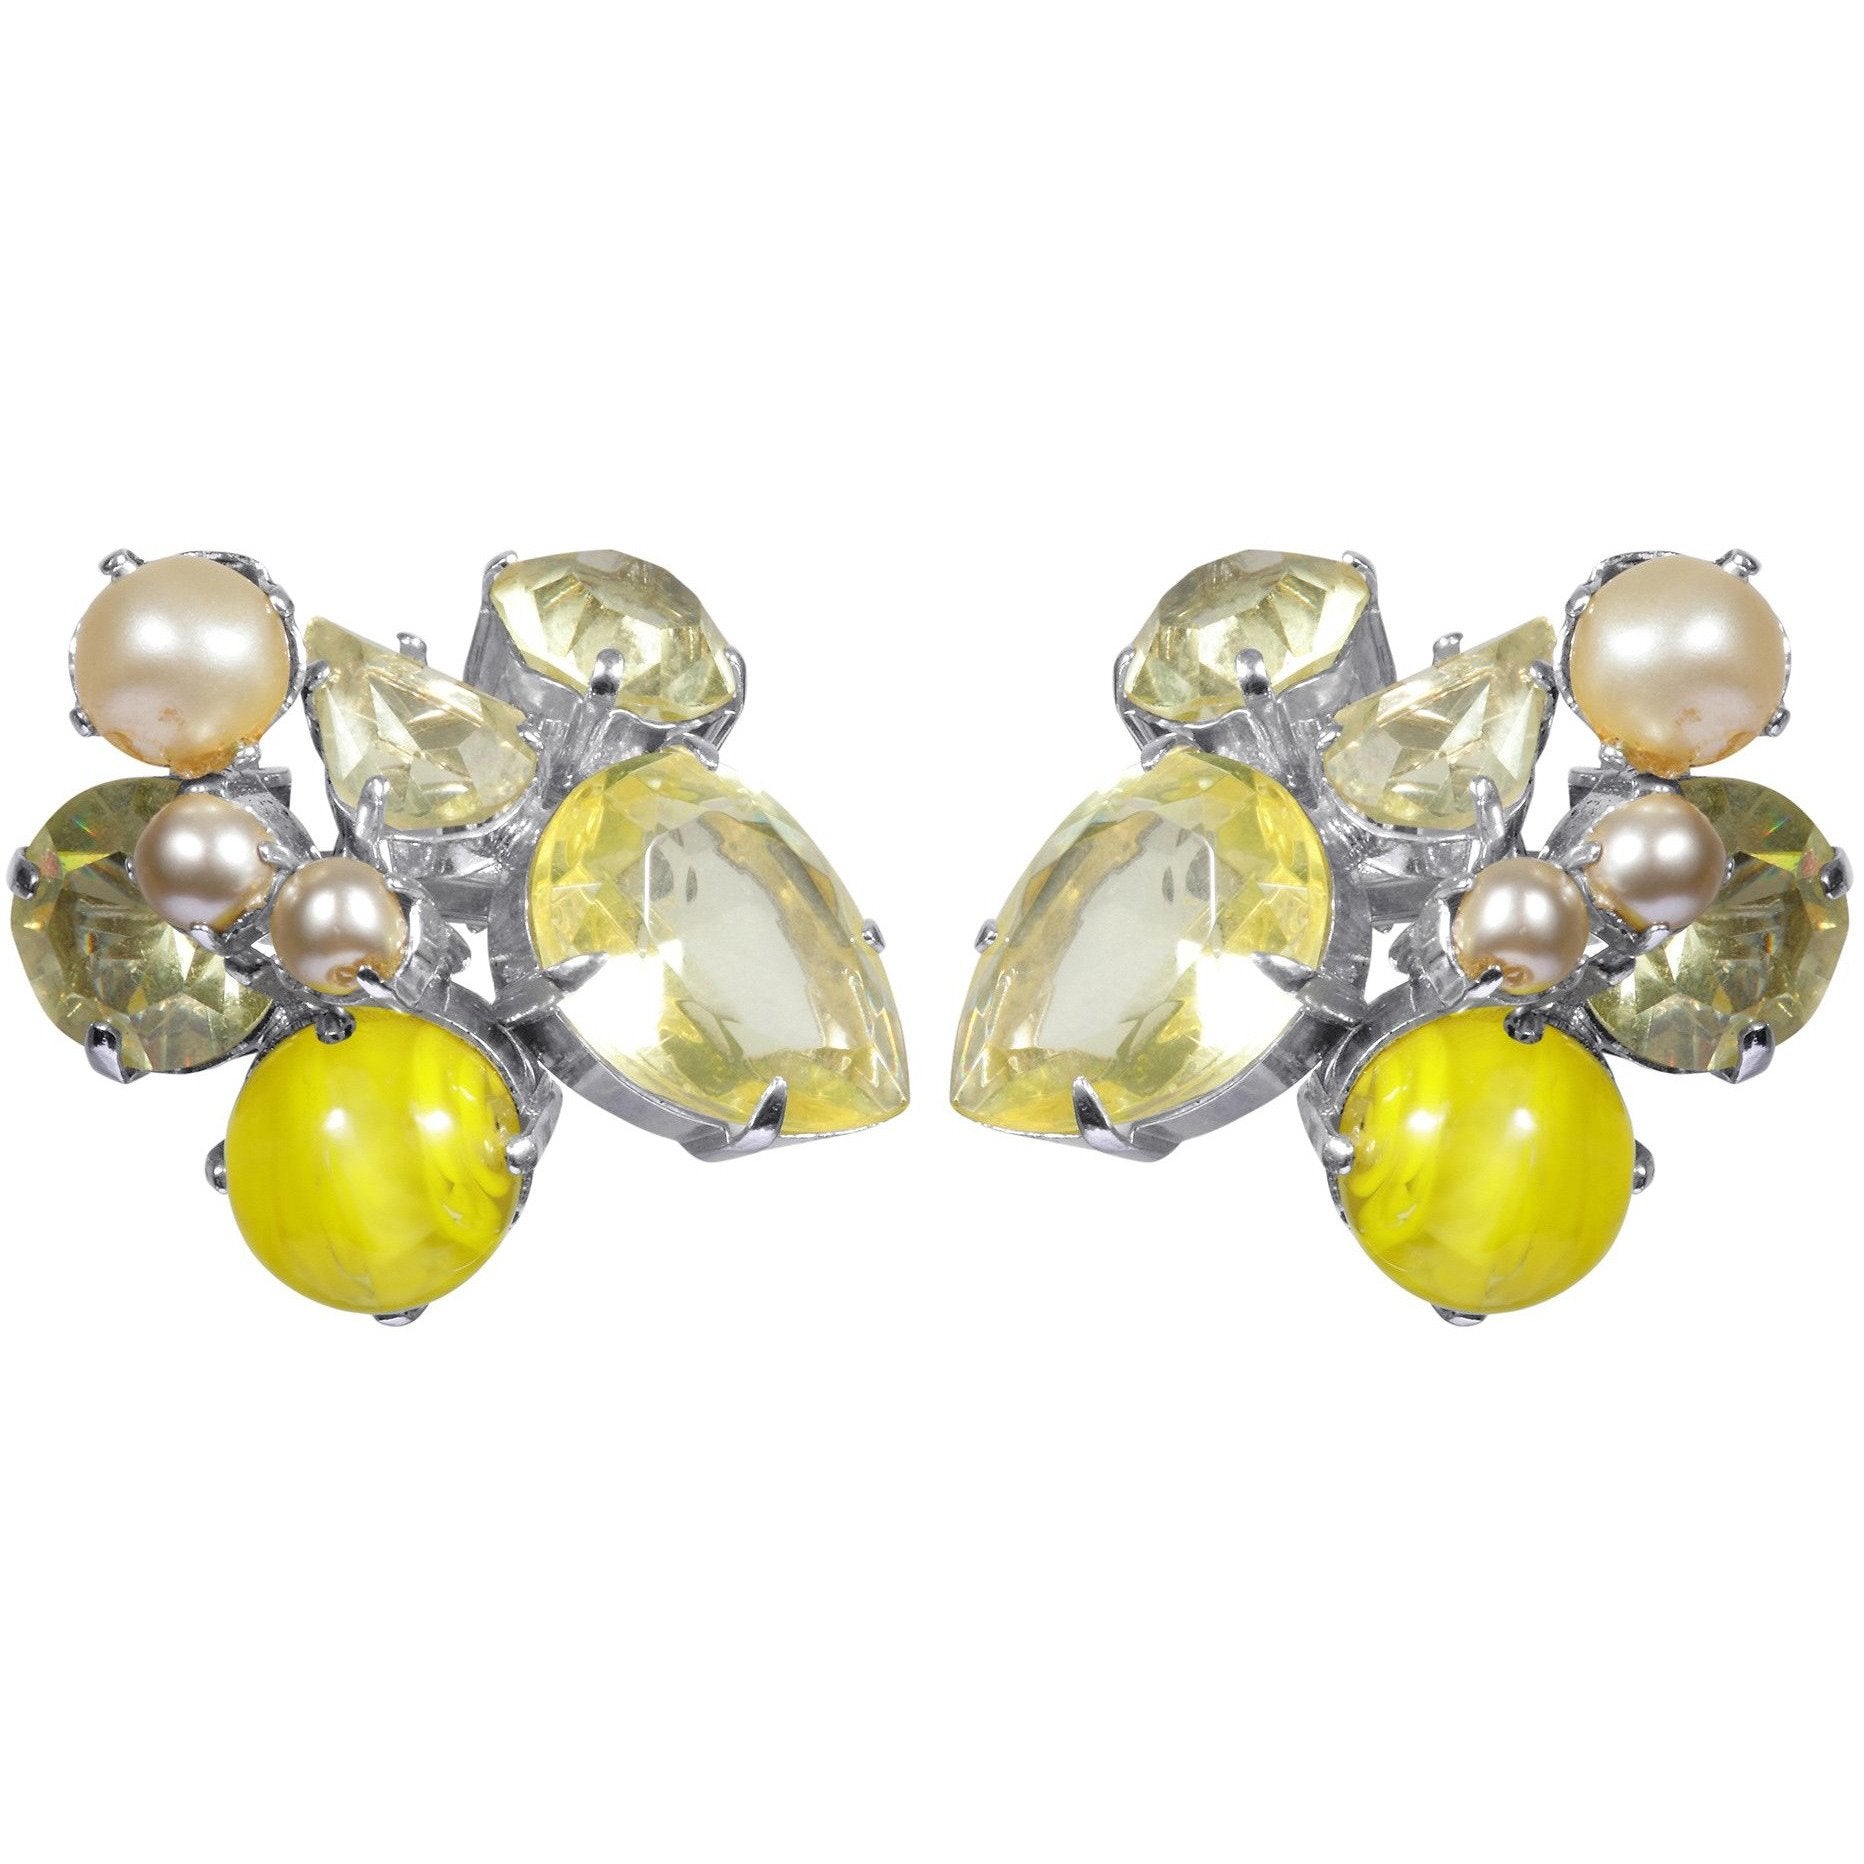 1961 Christian Dior Yellow and Pearl Cluster Earrings